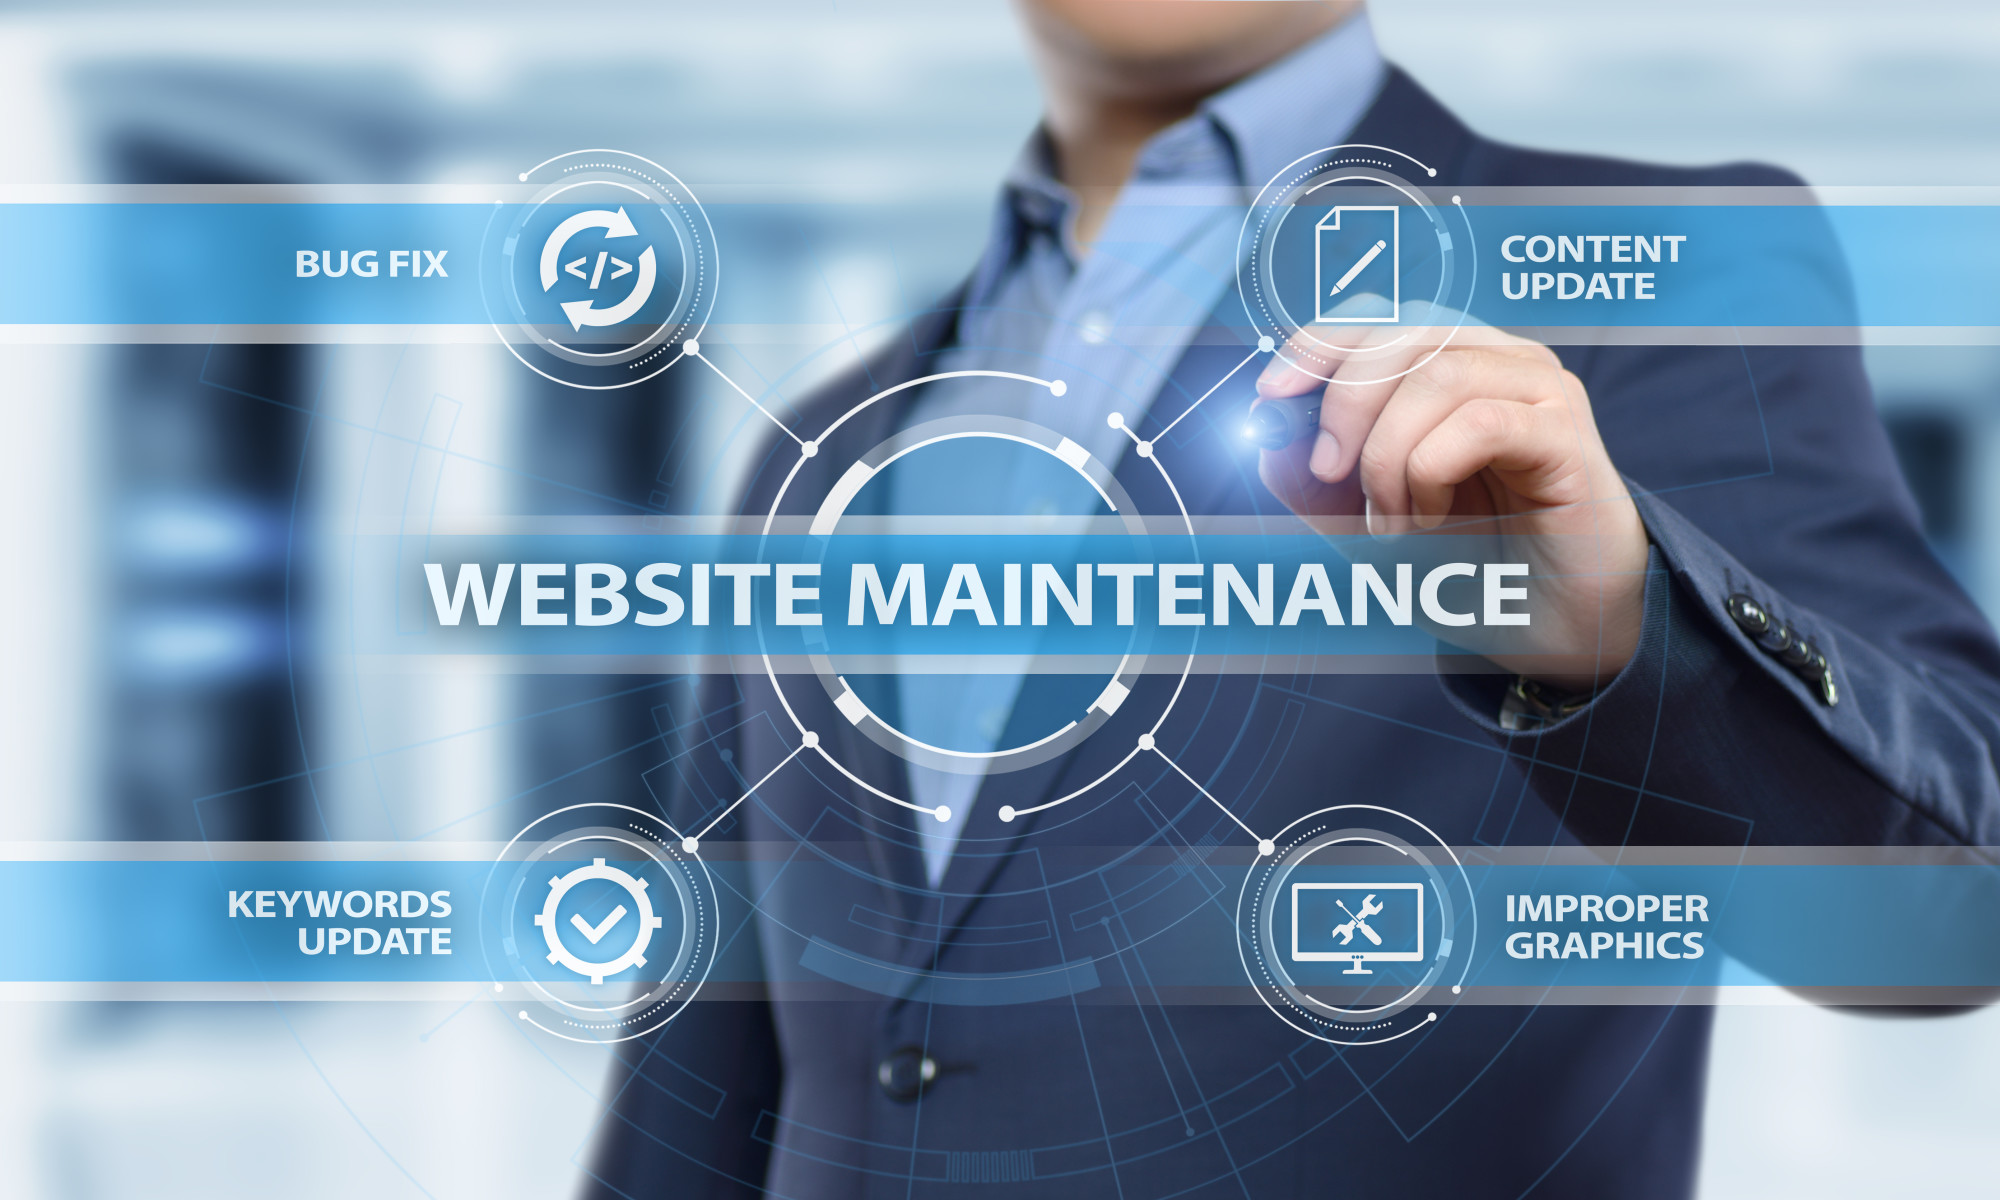 The importance of Website Maintenance